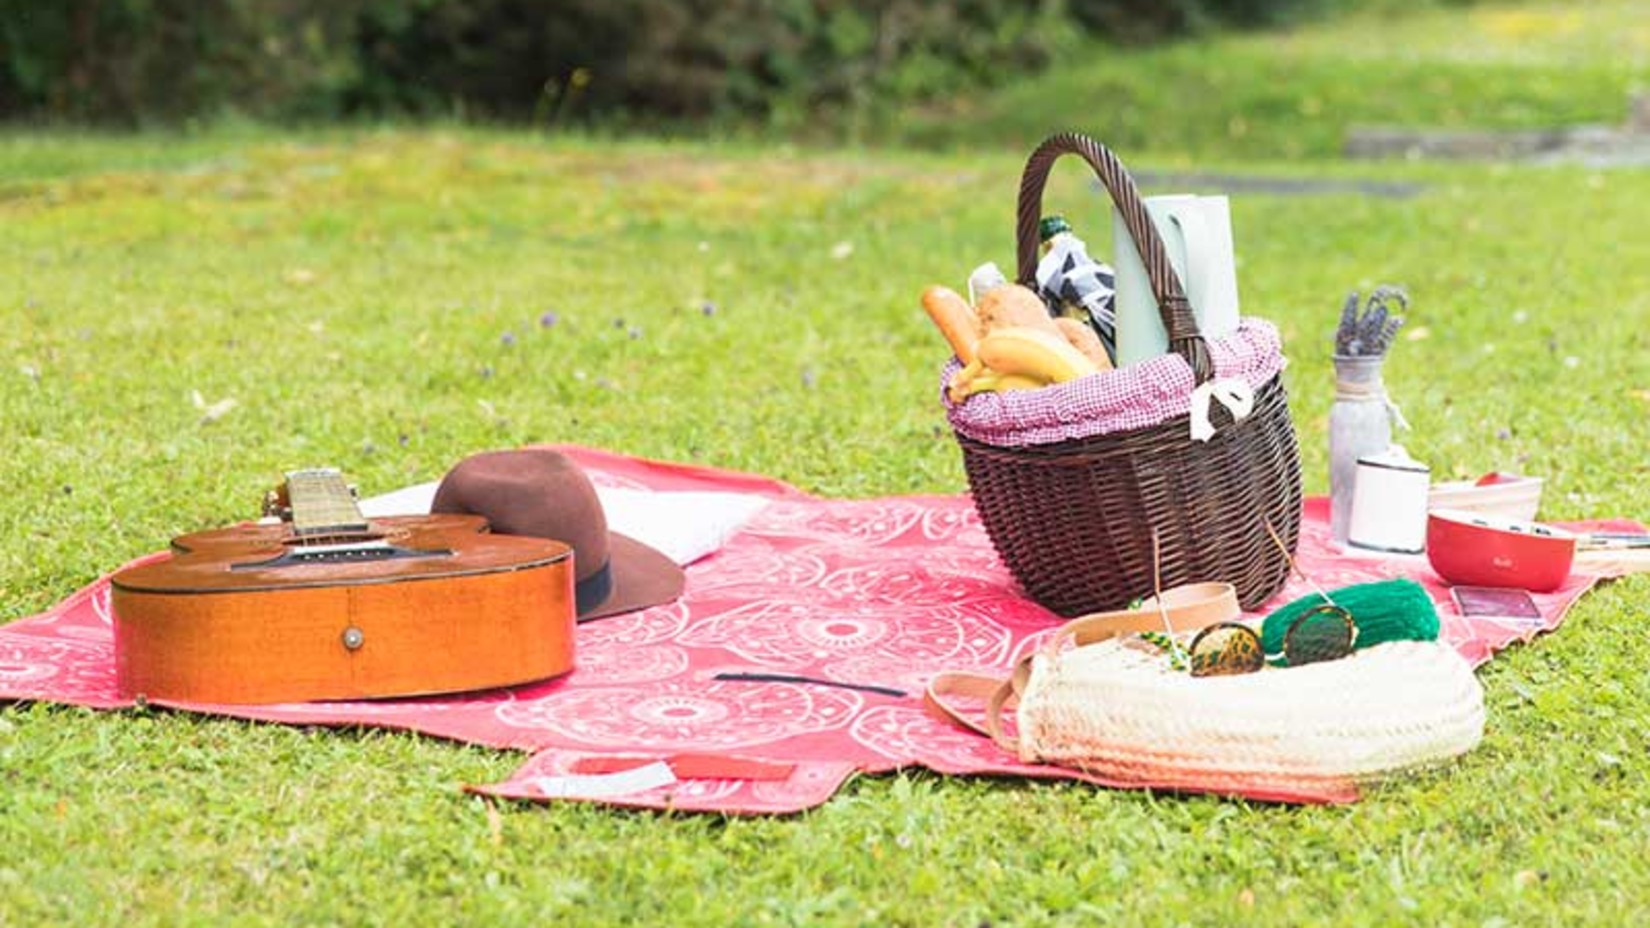 Picnic Spots for the Perfect Day